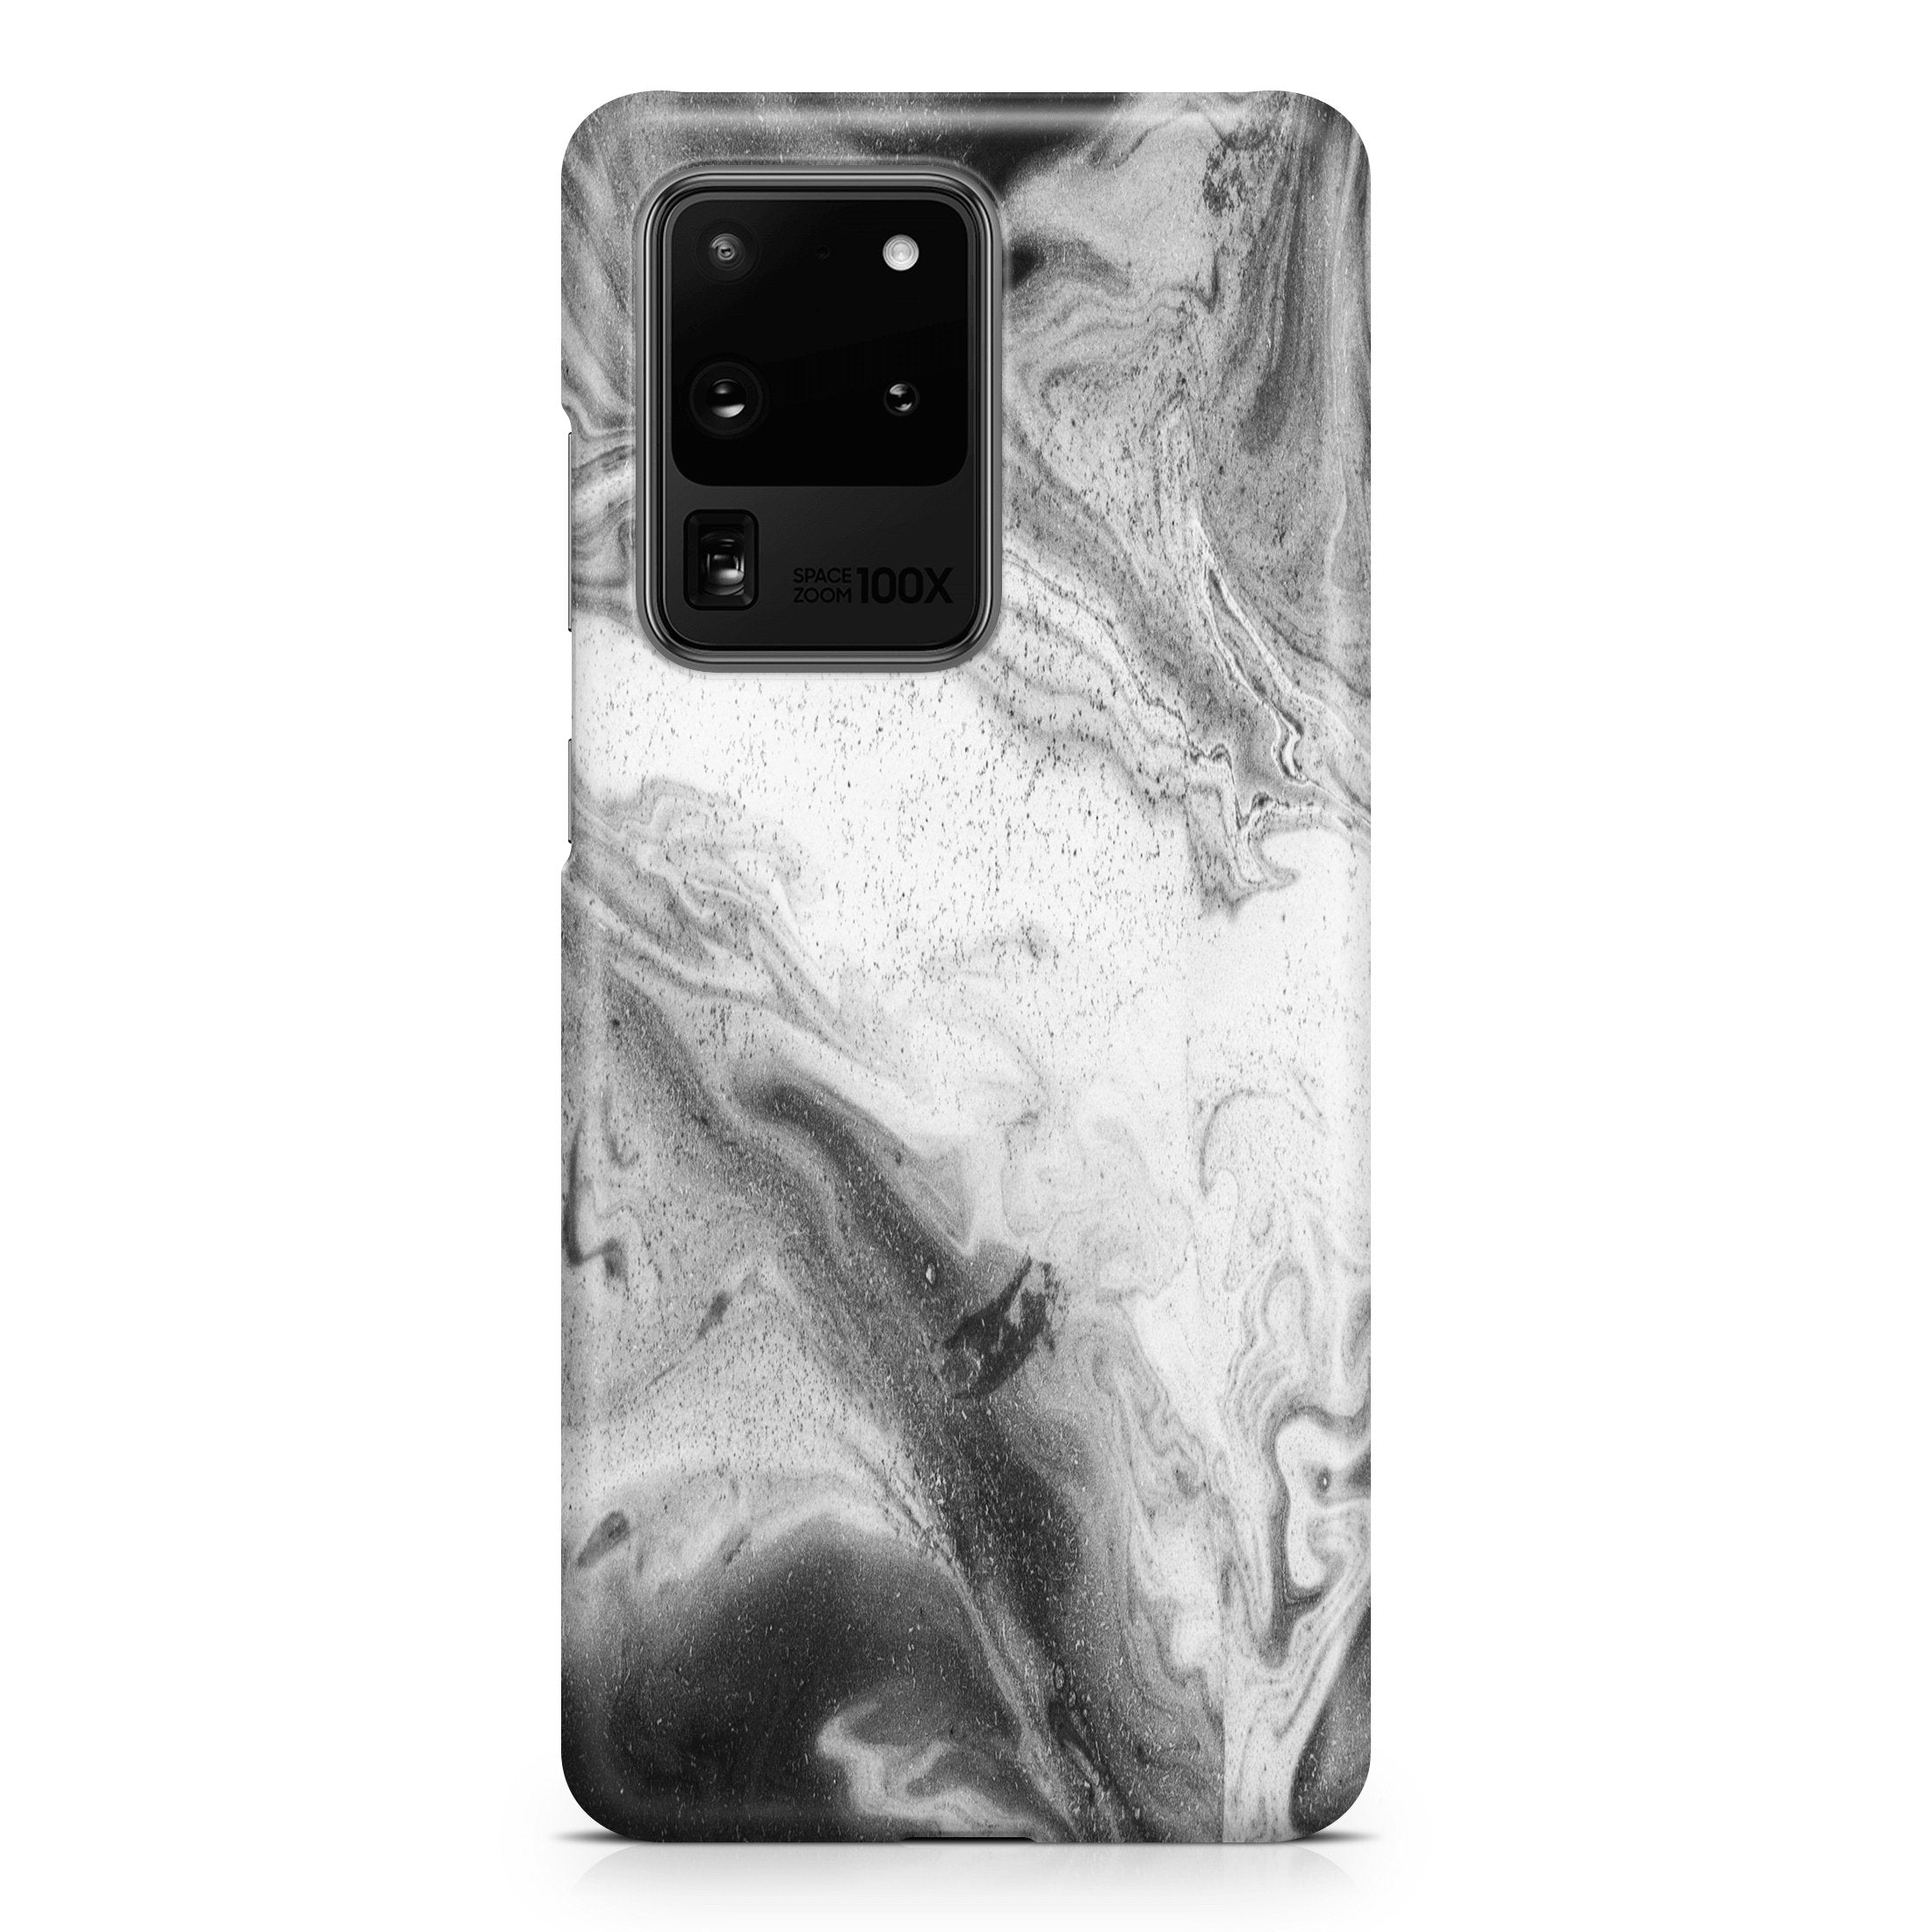 Black & White Marble Series III - Samsung phone case designs by CaseSwagger